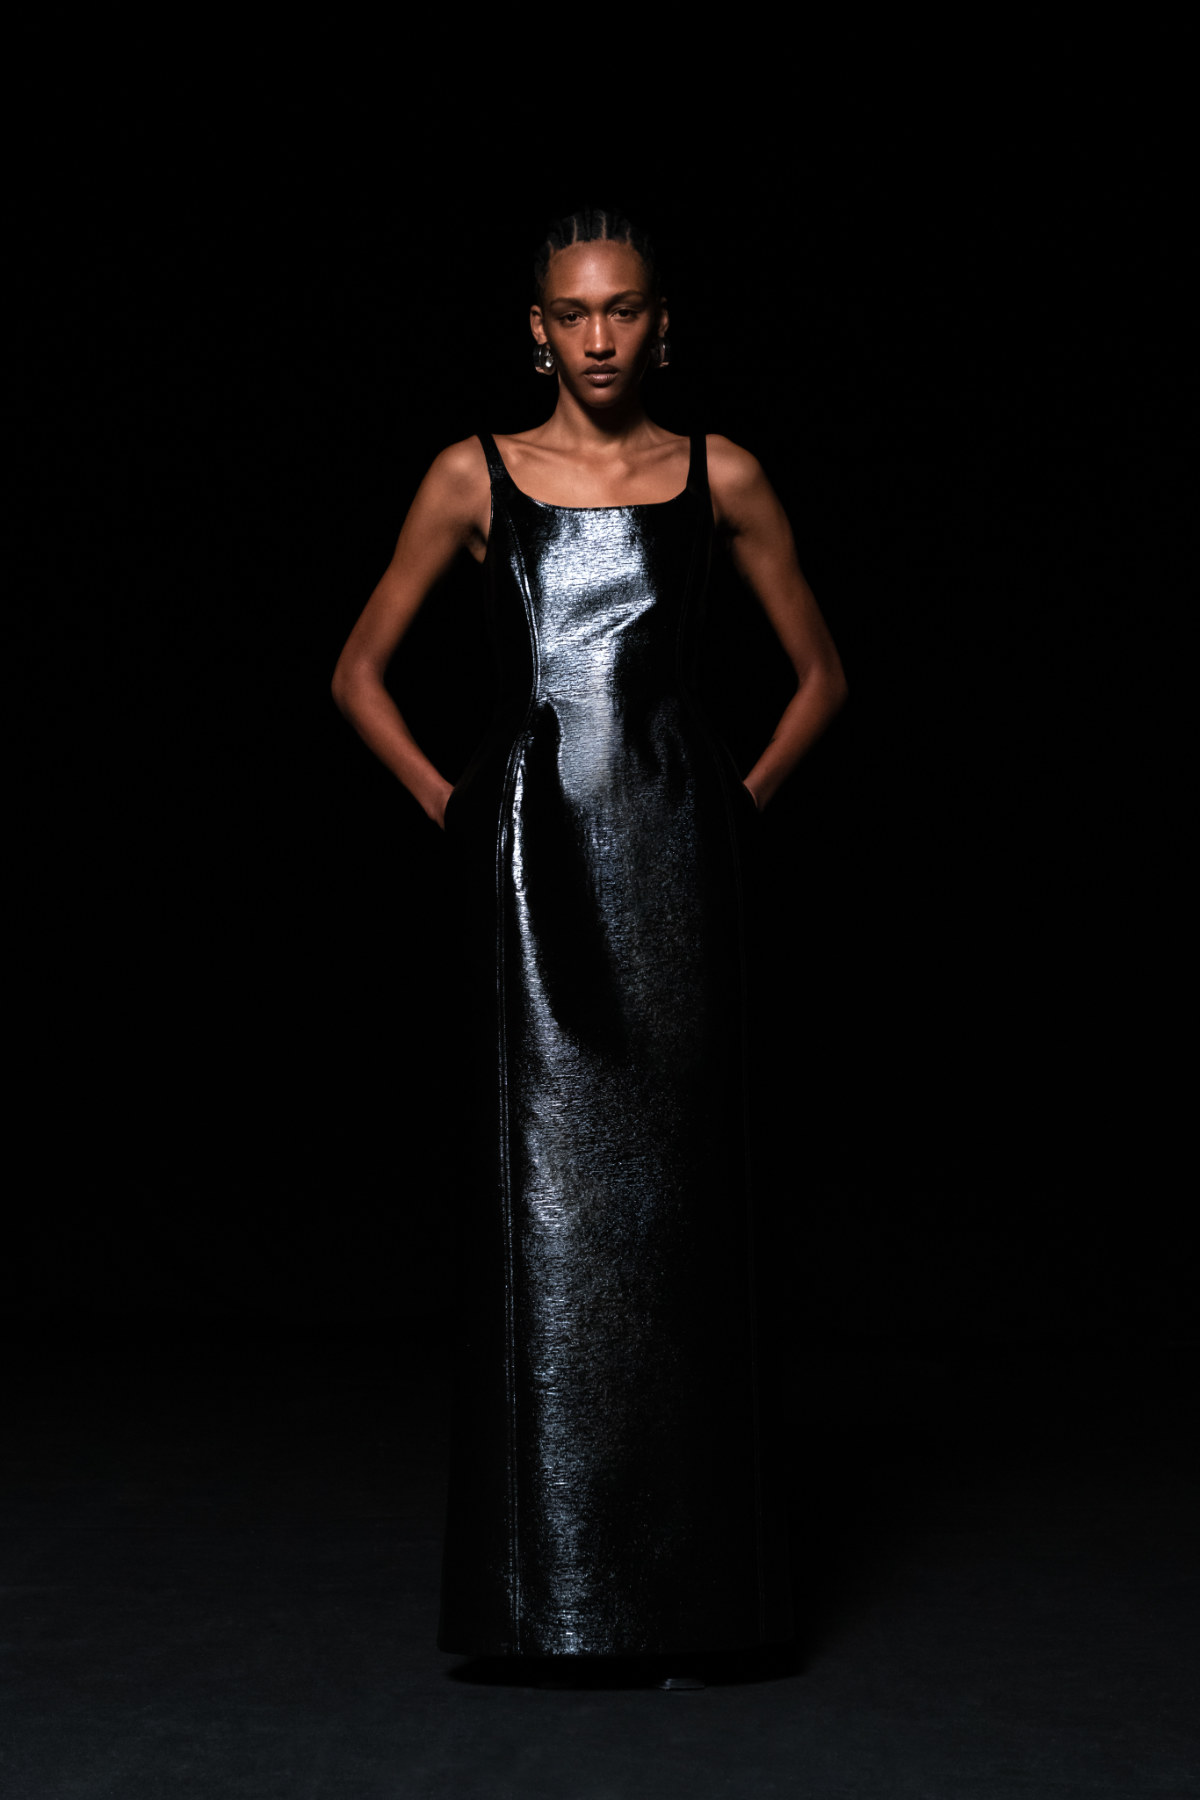 Maison Rabih Kayrouz Presents Its New FW22 Couture Collection